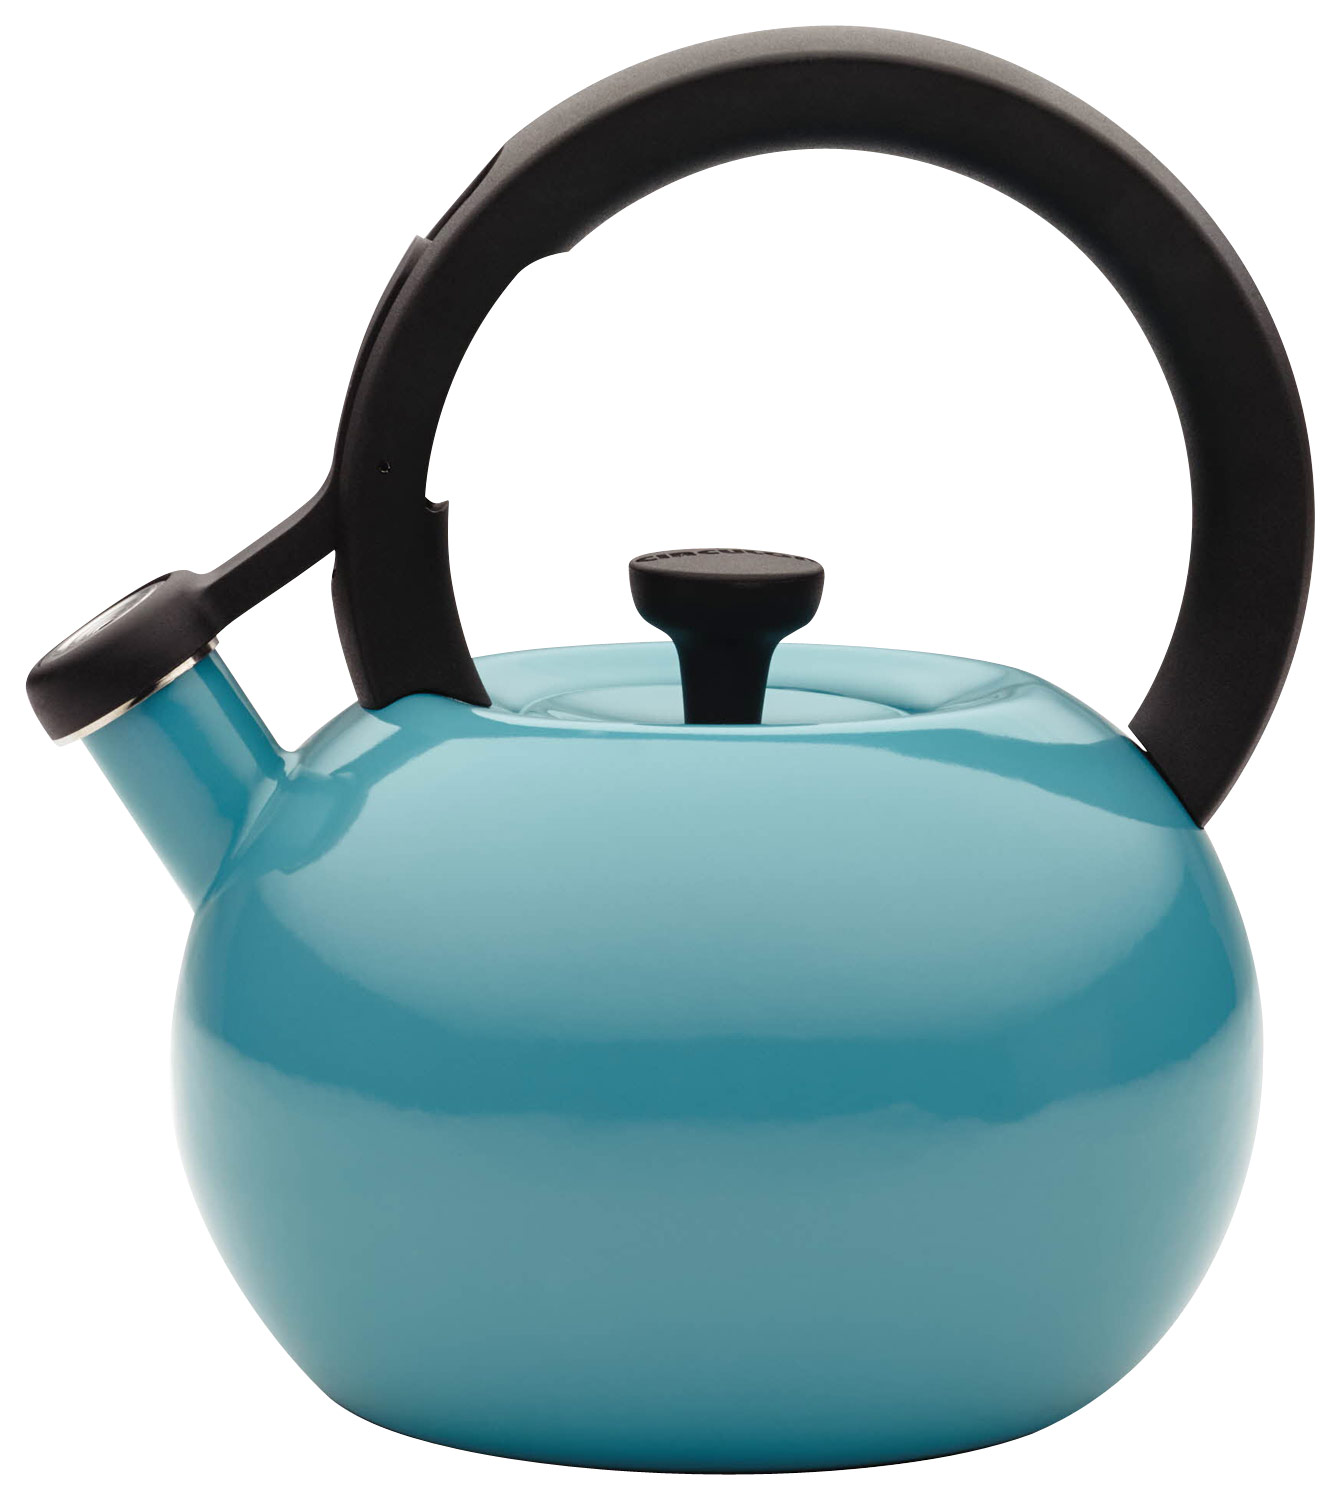 Circulon Enamel on Steel 2-Qt. Whistling Teakettle with Flip-Up Spout - Turquoise